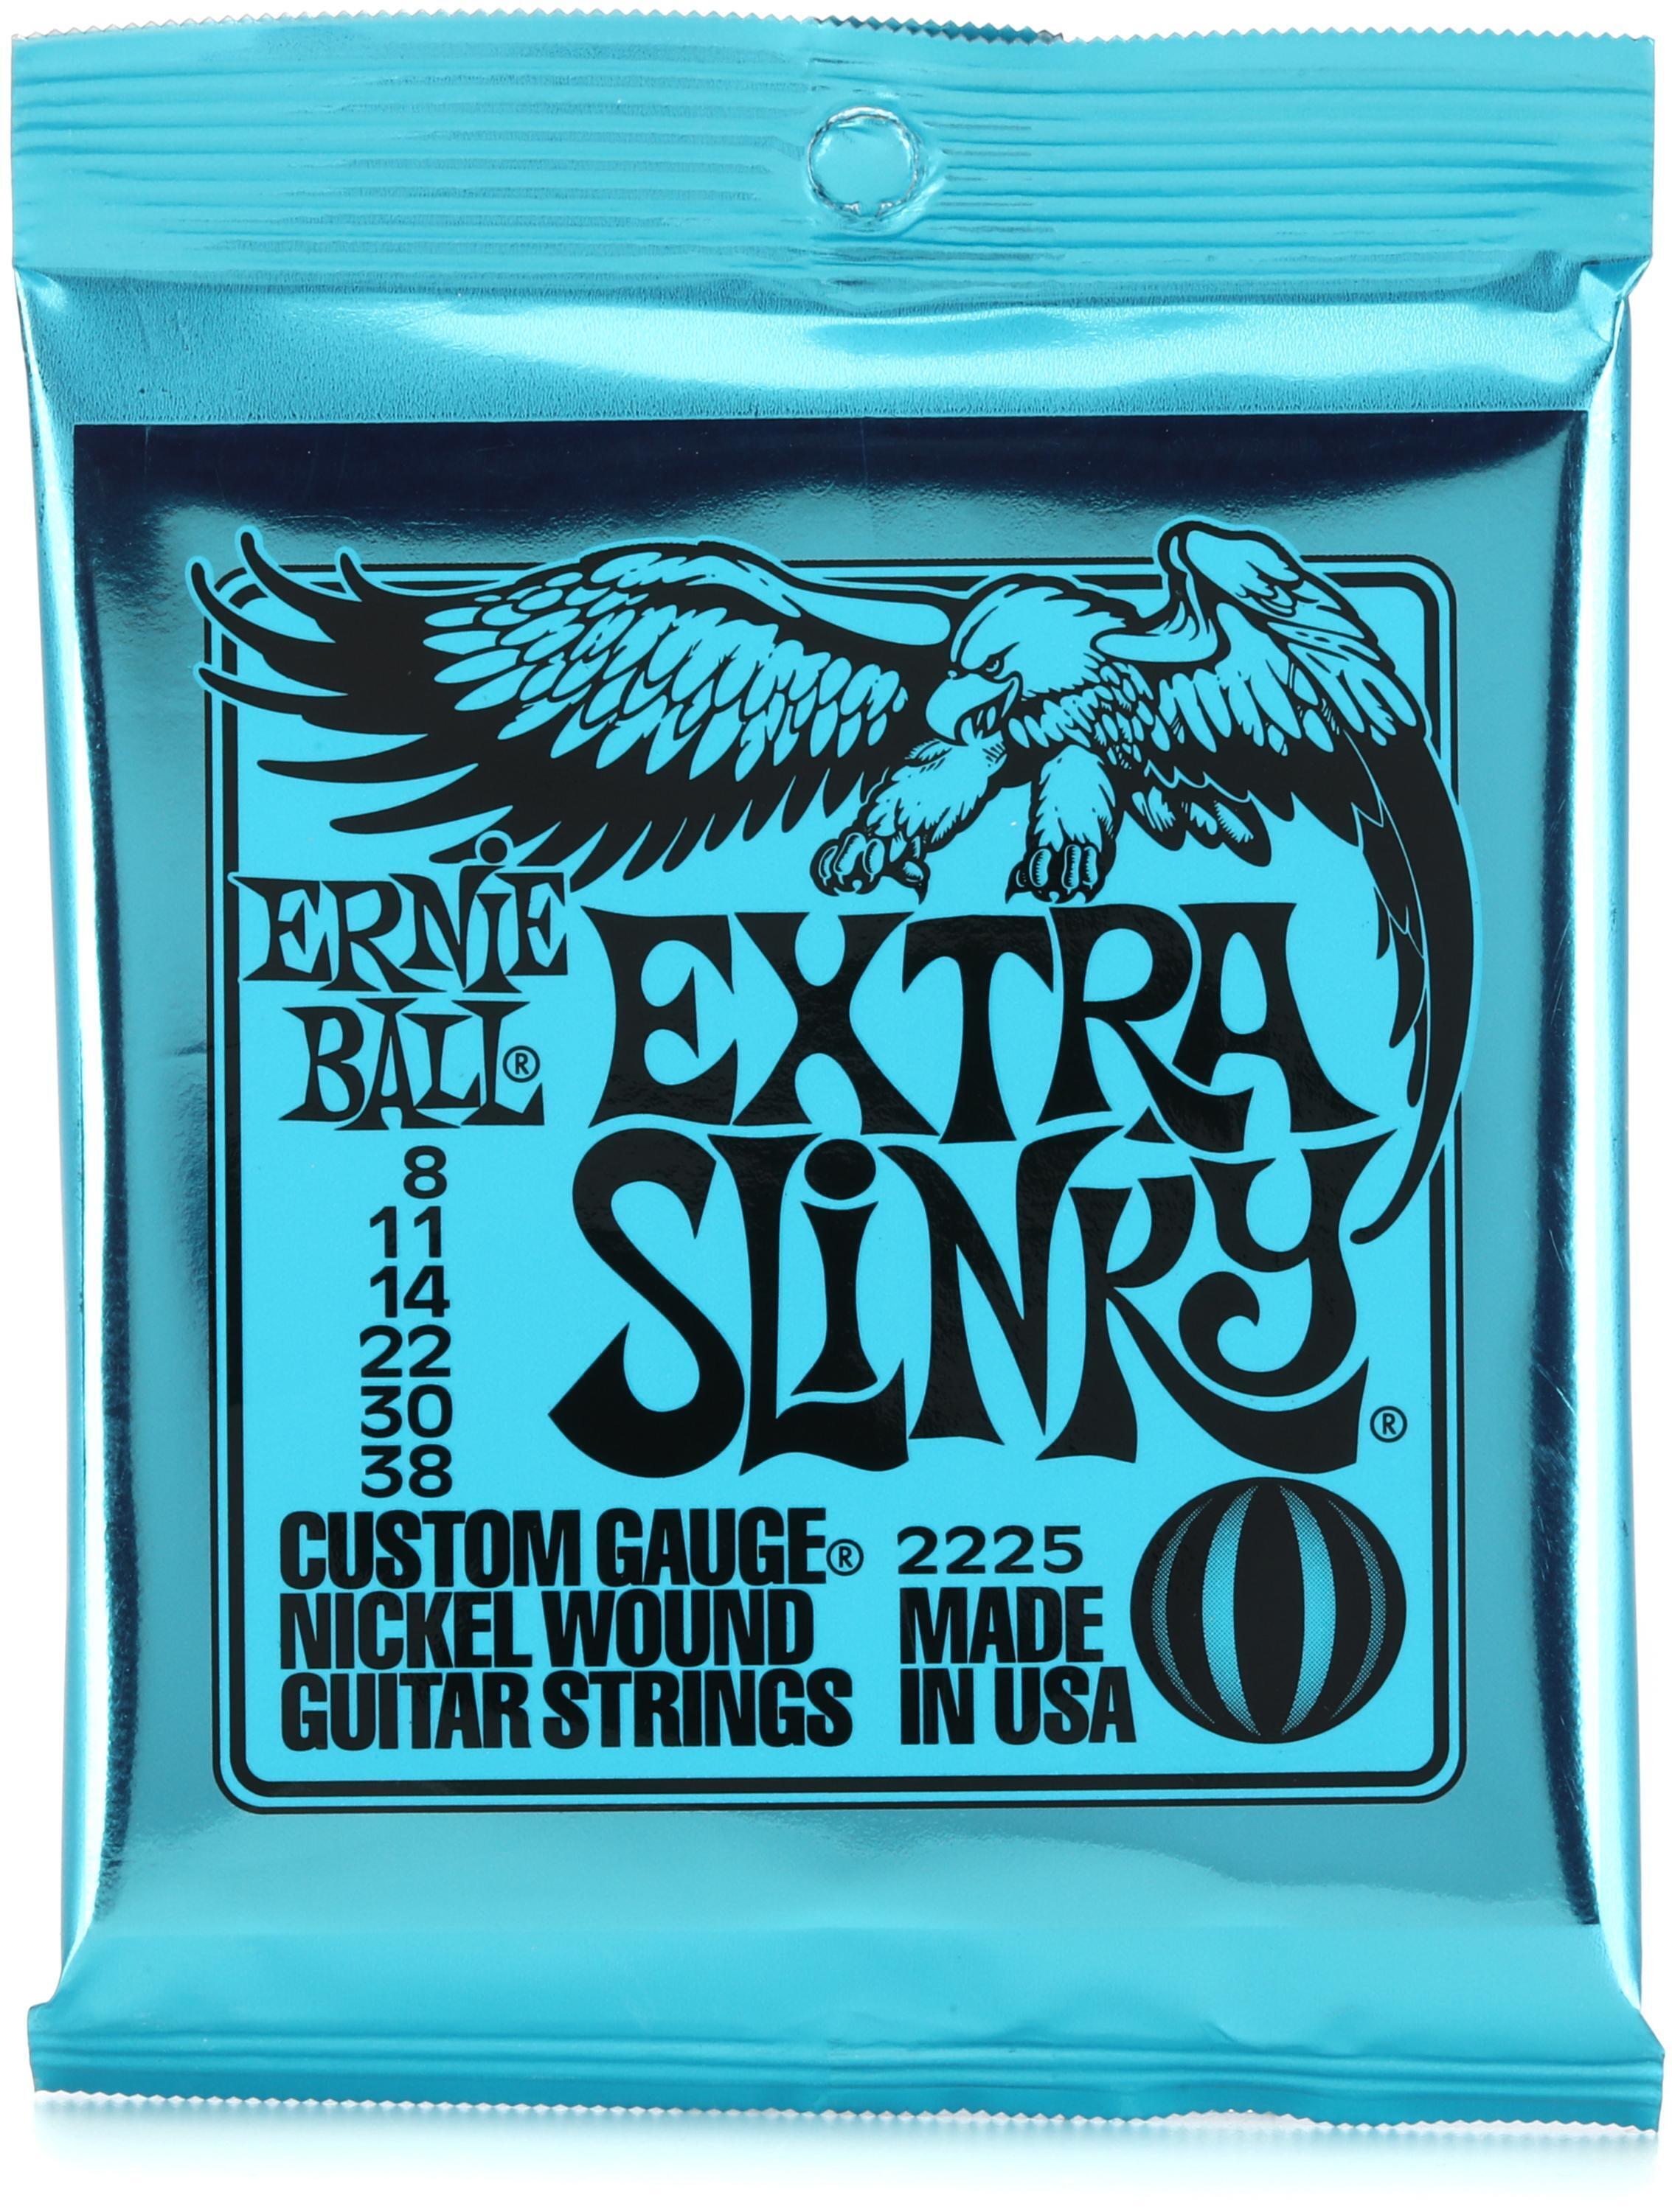 Ernie　Nickel　Extra　Ball　2225　.008-.038　Slinky　Guitar　Wound　Electric　Strings　Sweetwater